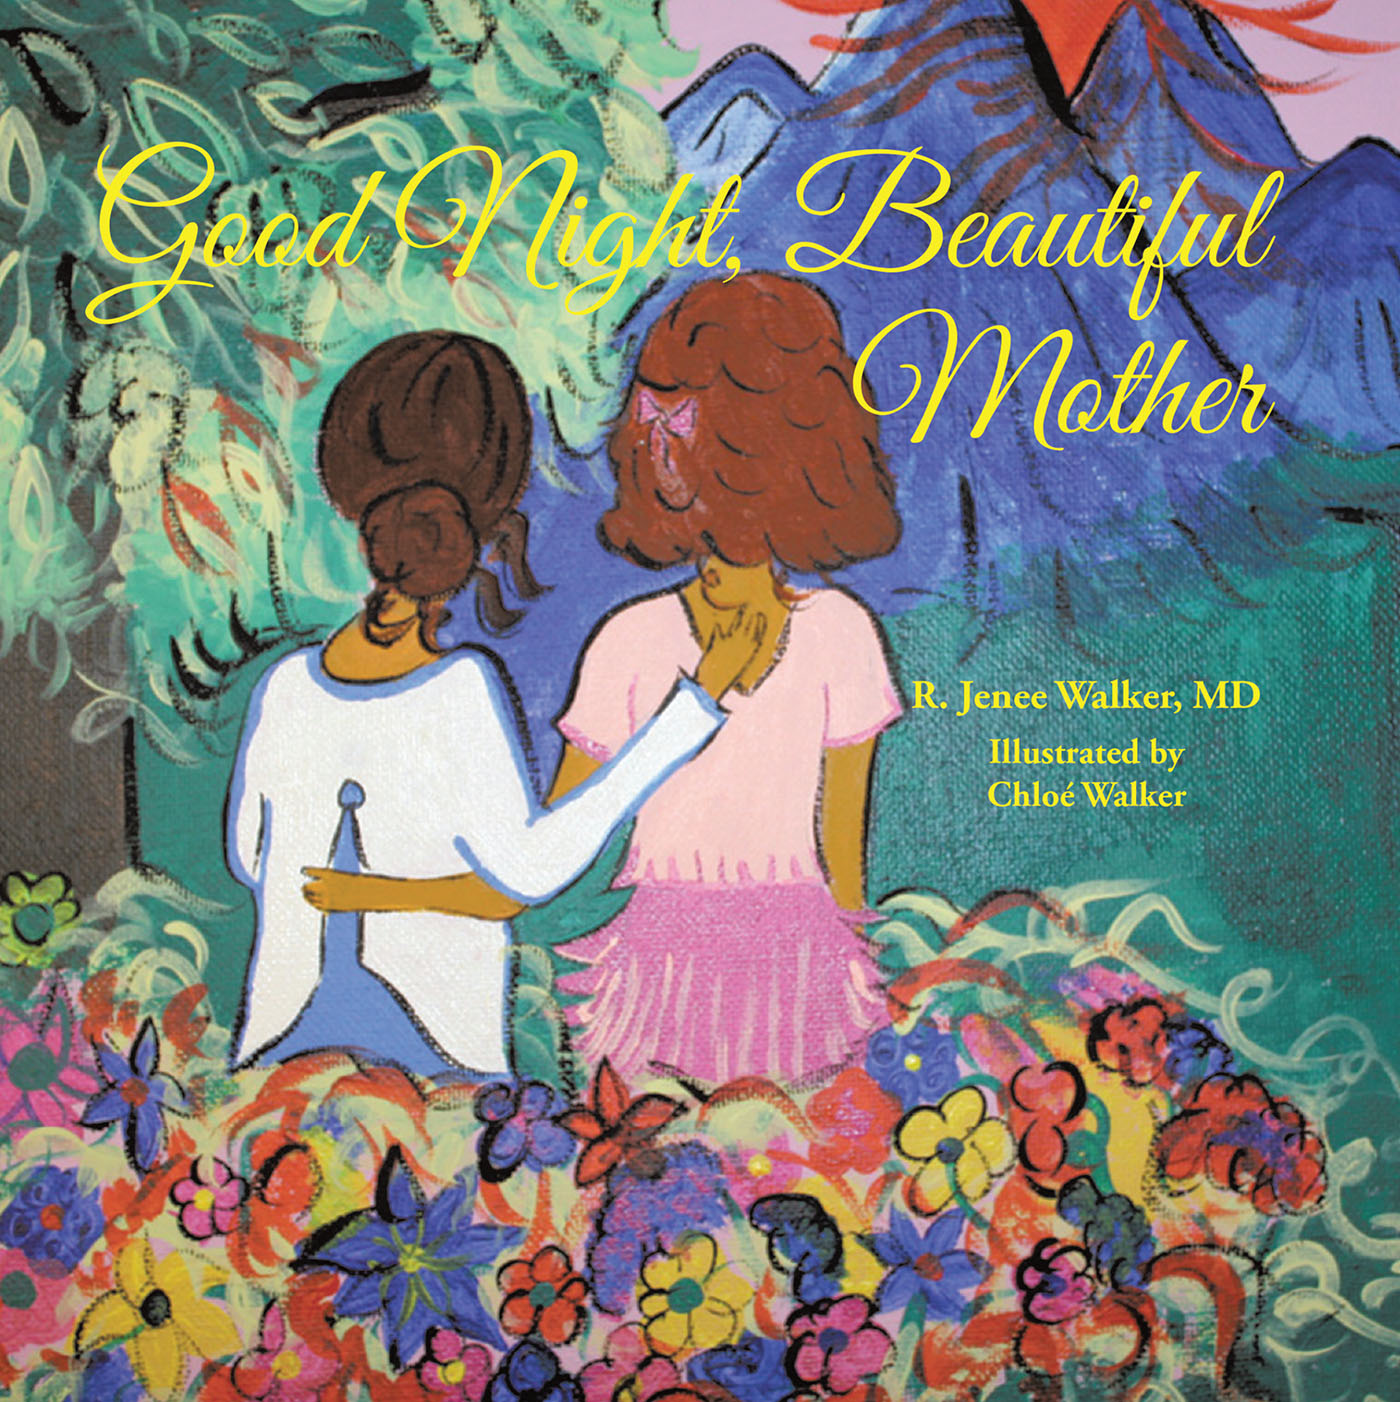 R. Jenee Walker, MD’s Newly Released “Good Night, Beautiful Mother” is a Heartfelt Story of a Mother’s Love and the Healing Journey After Losing a Parent